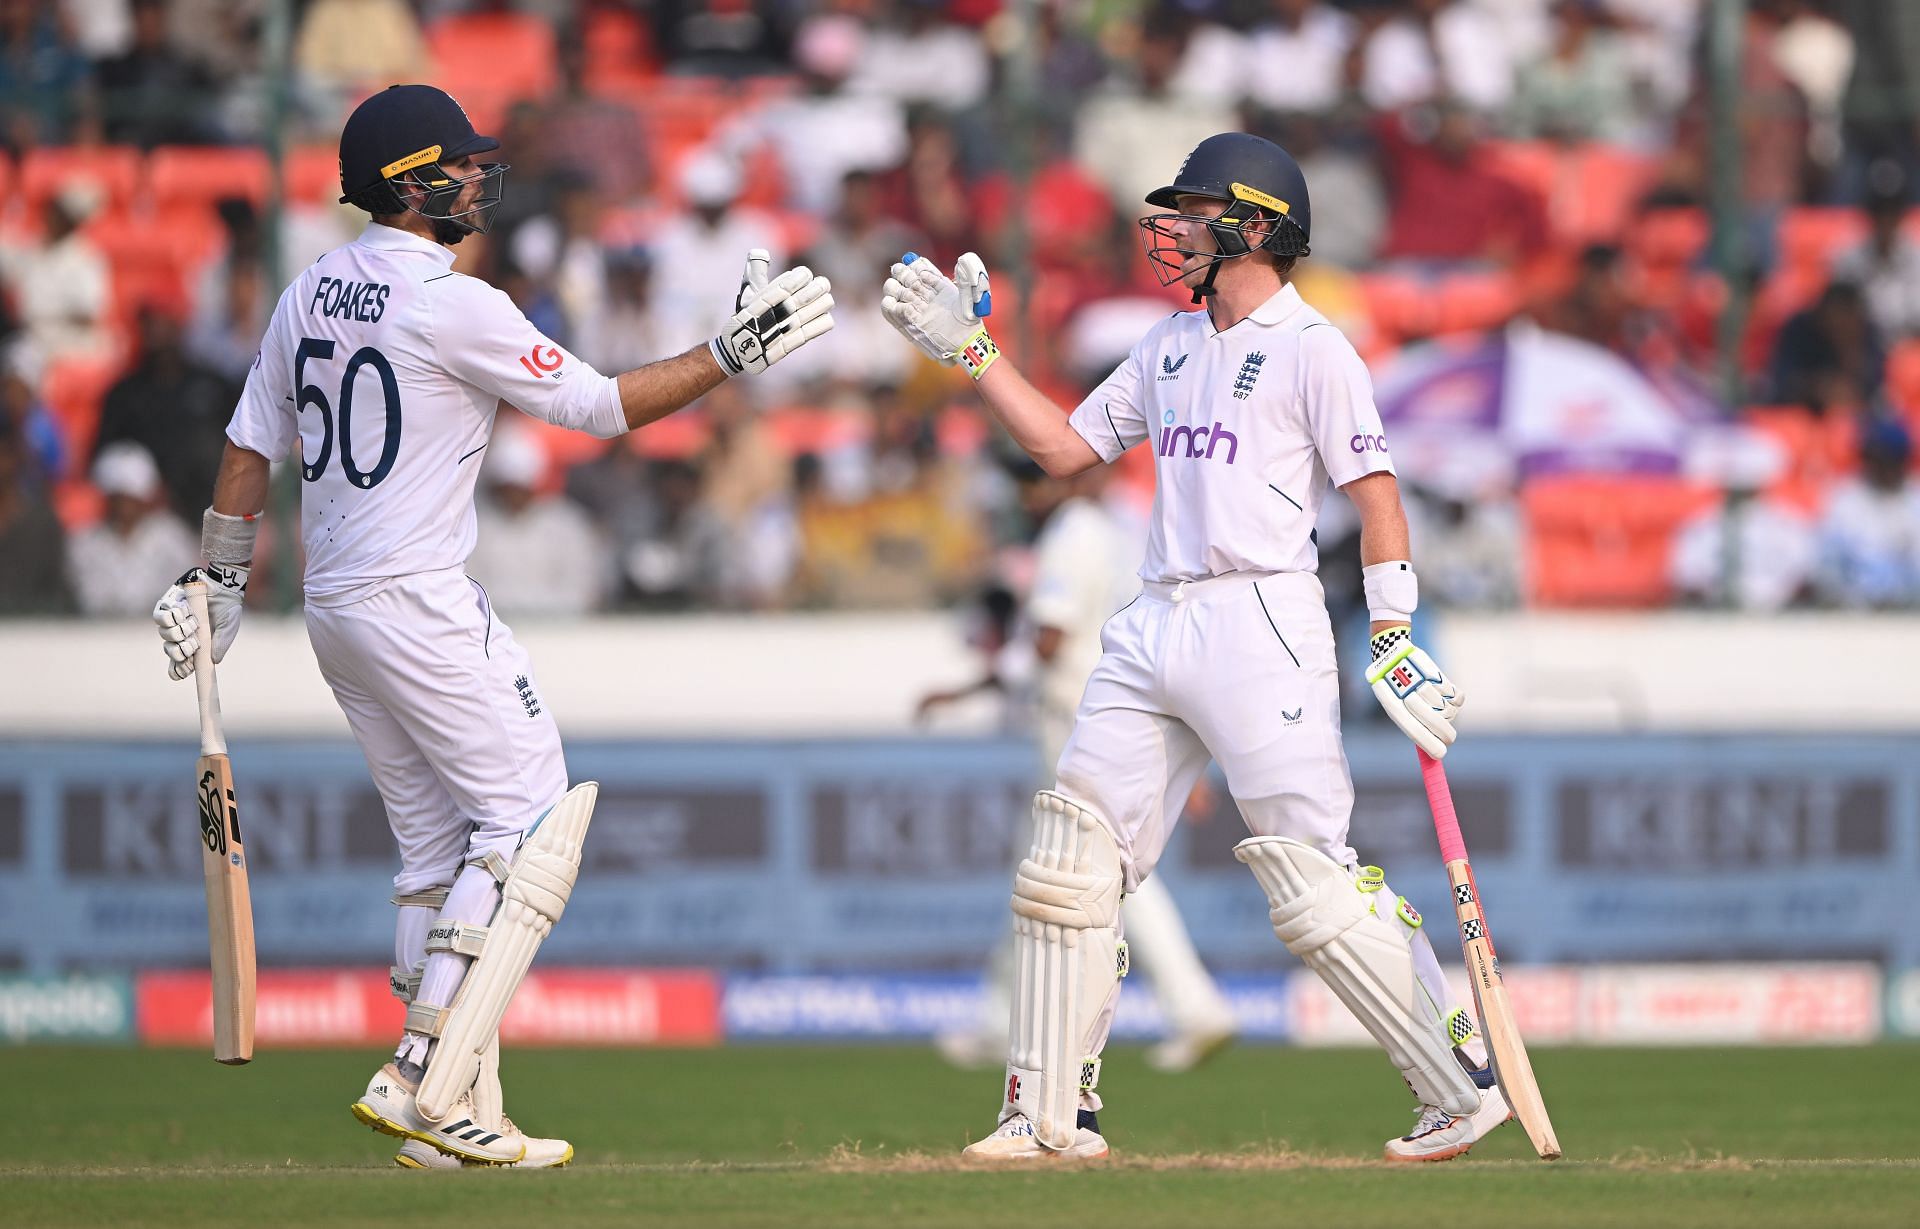 Ben Foakes and Ollie Pope. (Image Credits: Getty)